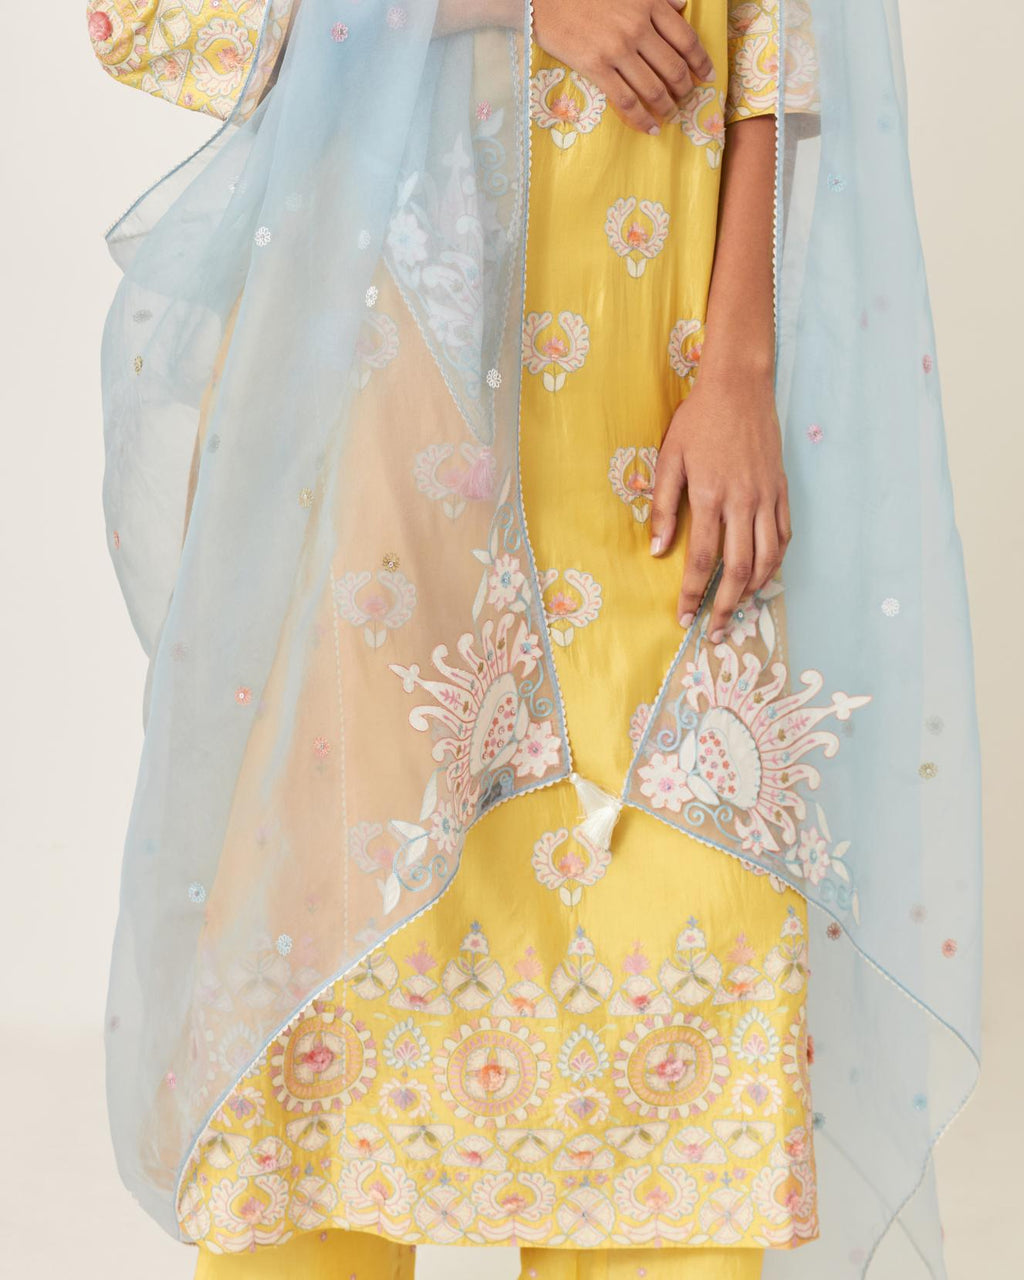 Blue silk organza dupatta with appliqué work and multi colored flower embroidery all-over the dupatta.